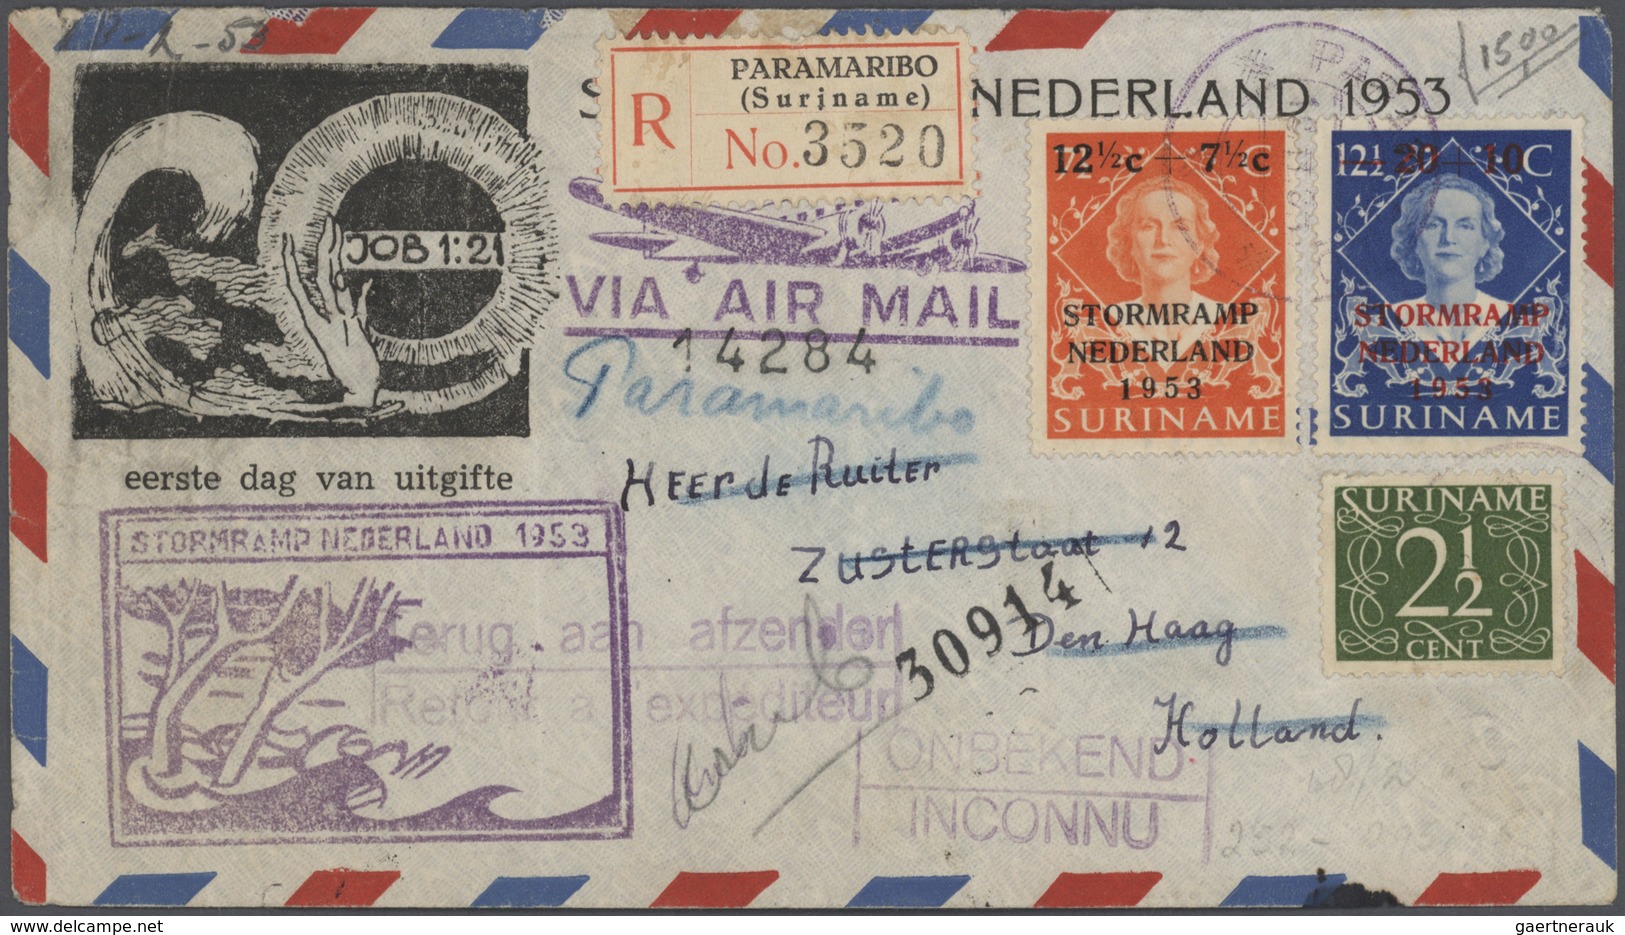 Niederlande: 1877/1957, Netherlands/colonies, holding of apprx. 140 covers/cards/stationeries/ppc wi